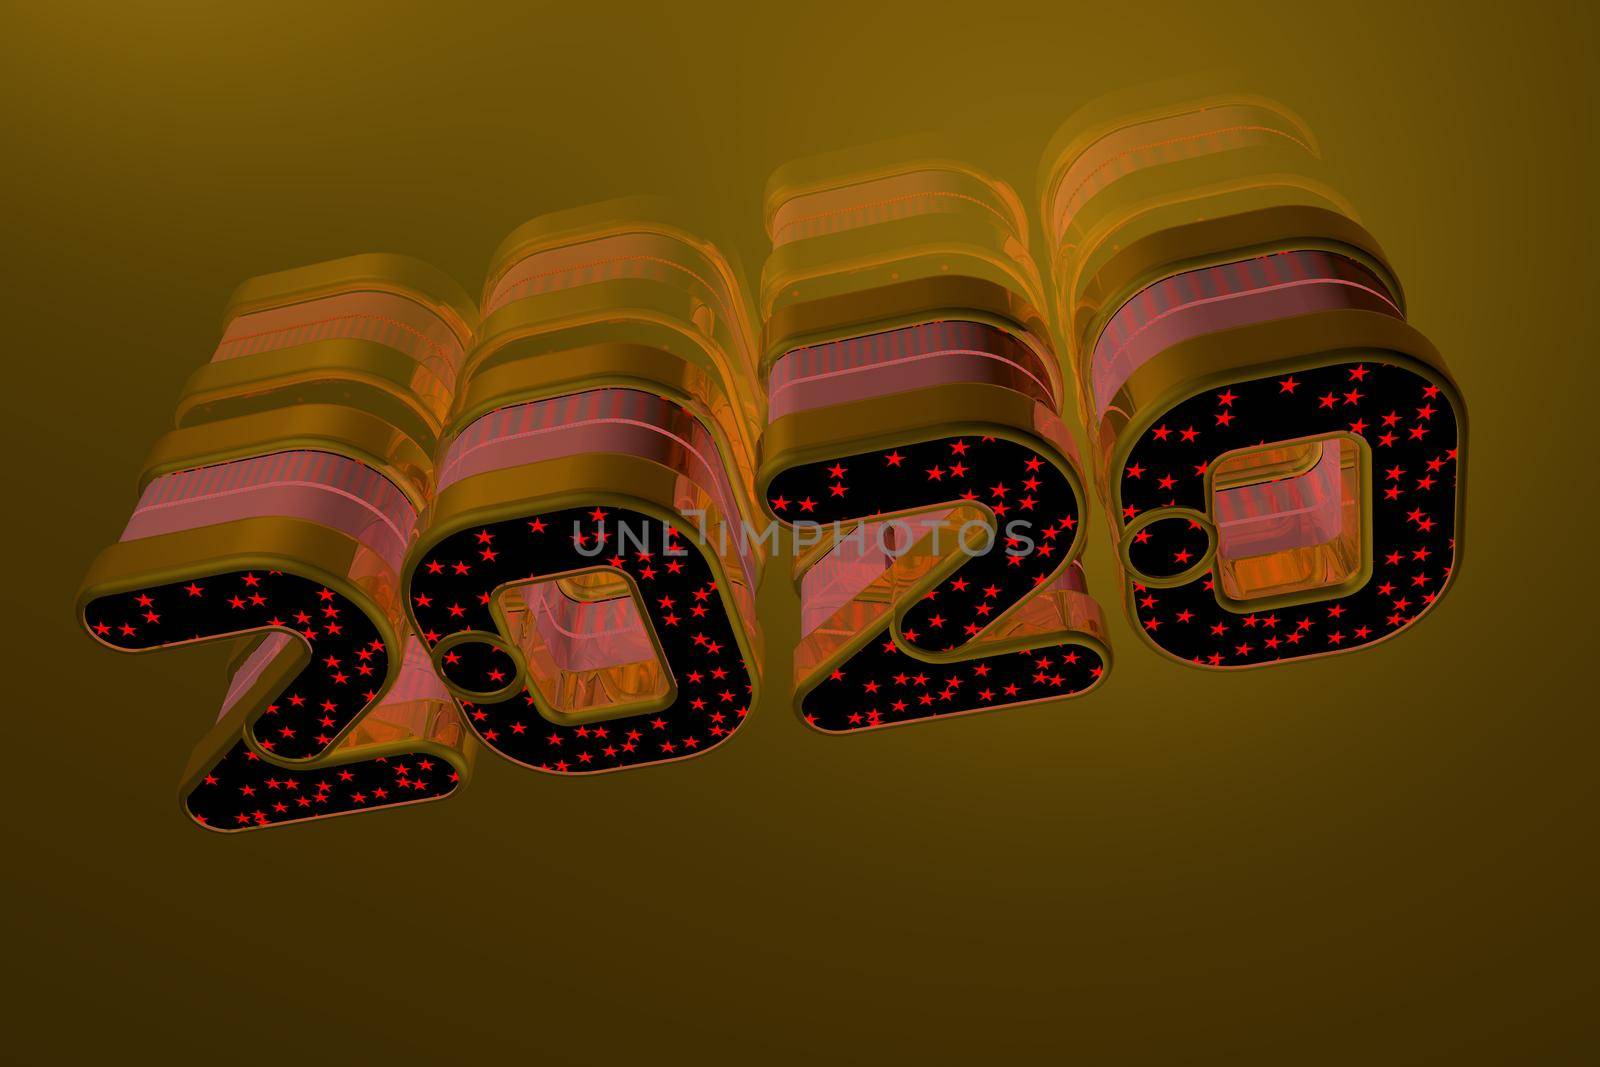 2020 typography on a golden background. The year 2020 greeting card with a golden decorative colorful design.